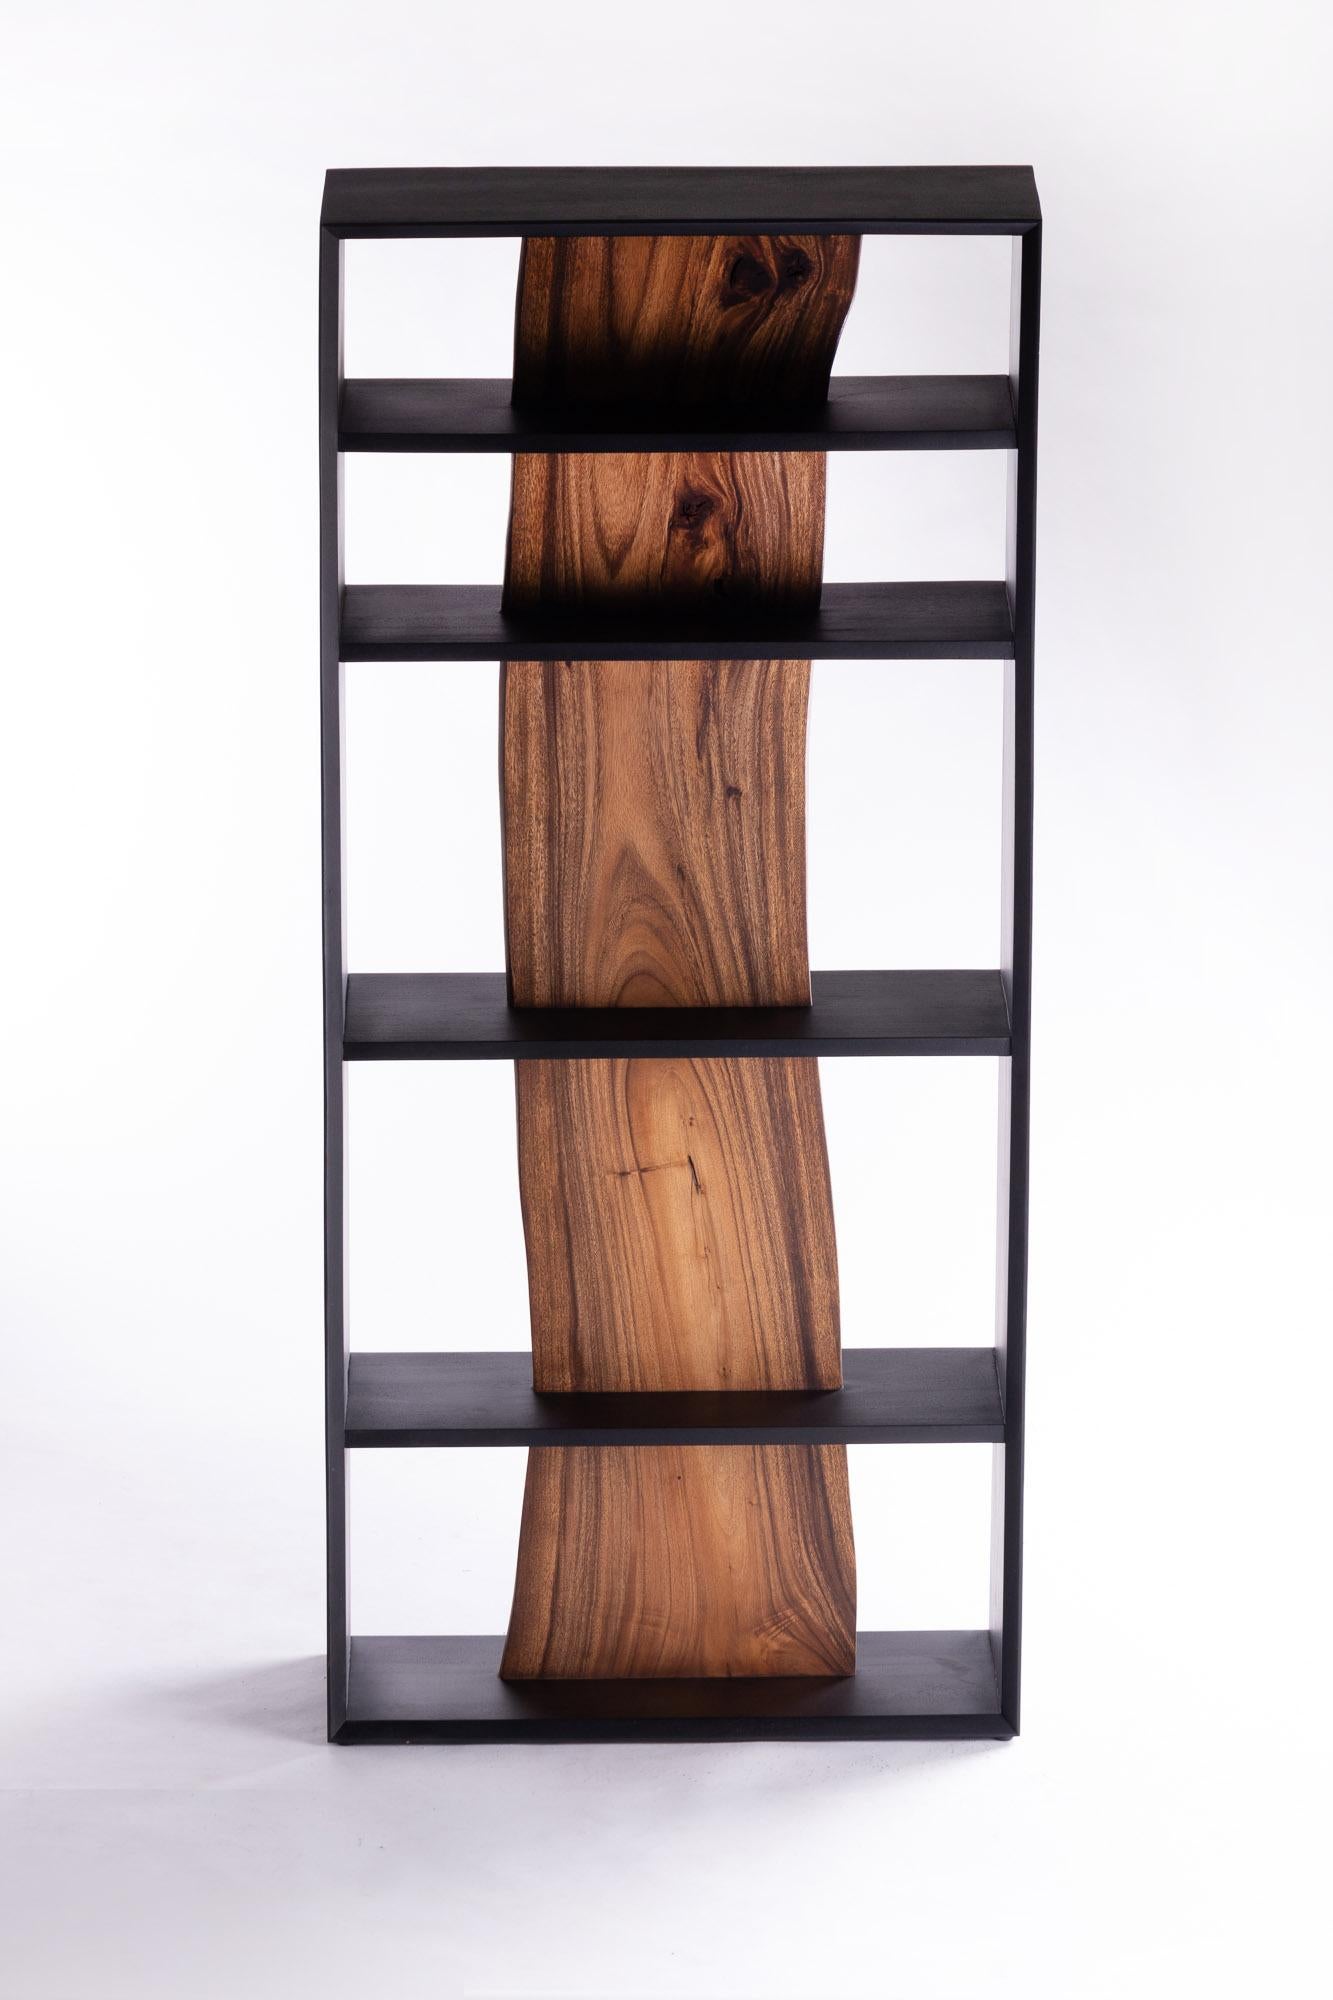 A great deal of time was spent considering the best way to cut wood without wasting its unique beauty. After careful consideration, this wood piece maintains its essential values by combining natural-shaped wood with simple pieces, creating a shelf